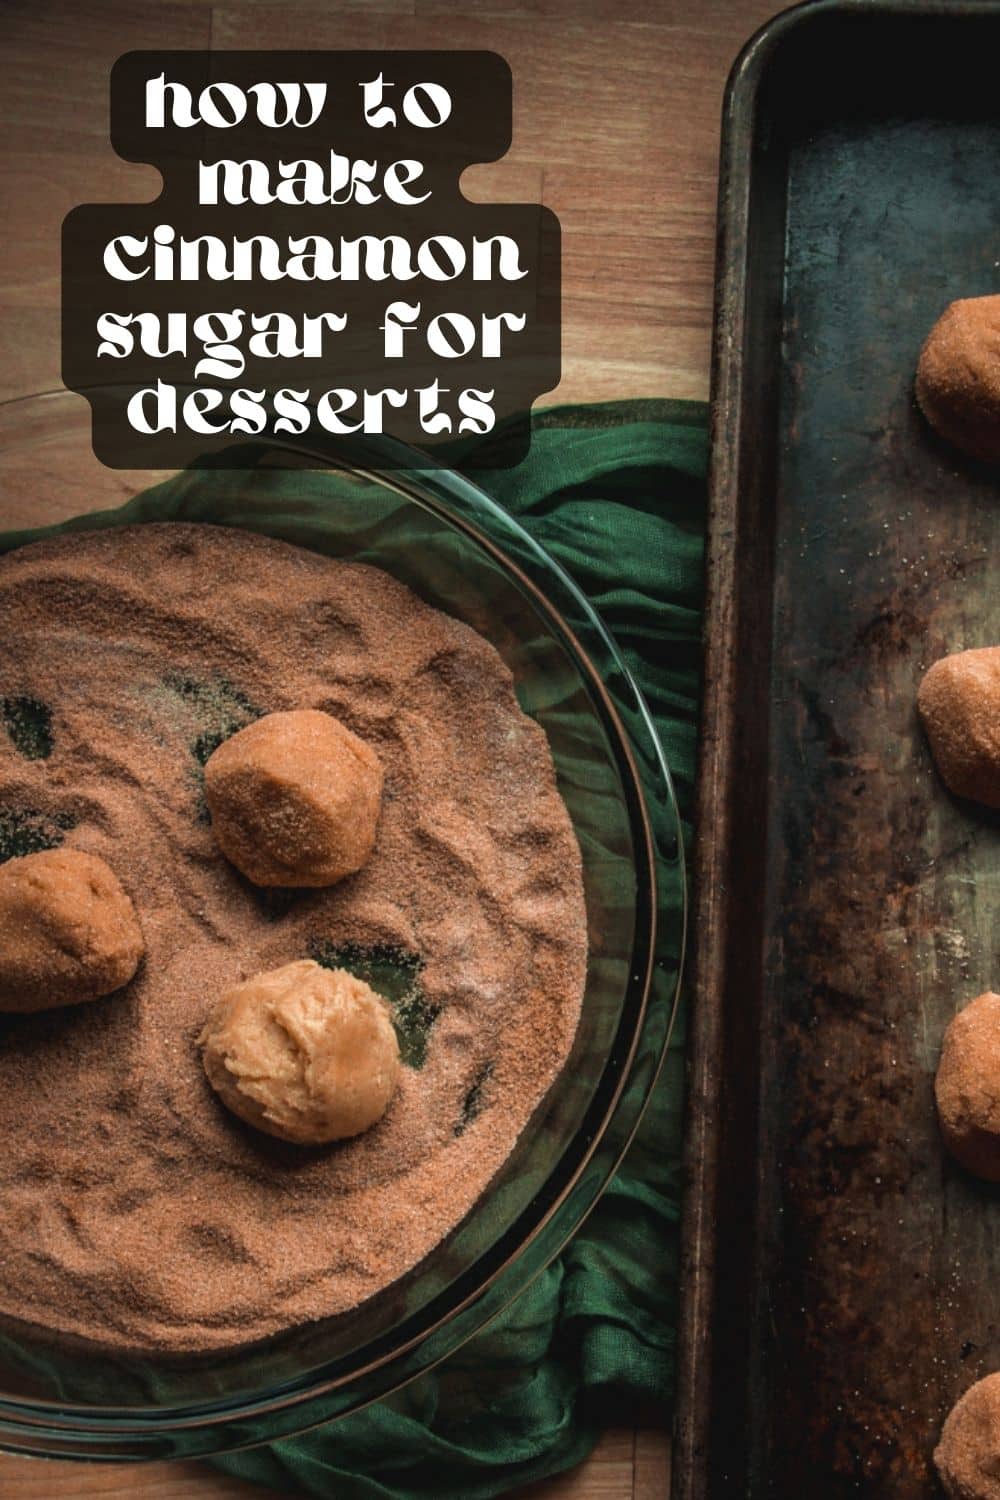 This cinnamon and sugar recipe has the perfect ratio of spice to sweetness. With just the right amount of each ingredient, you can create a delicious topping or filling for your favorite treats!